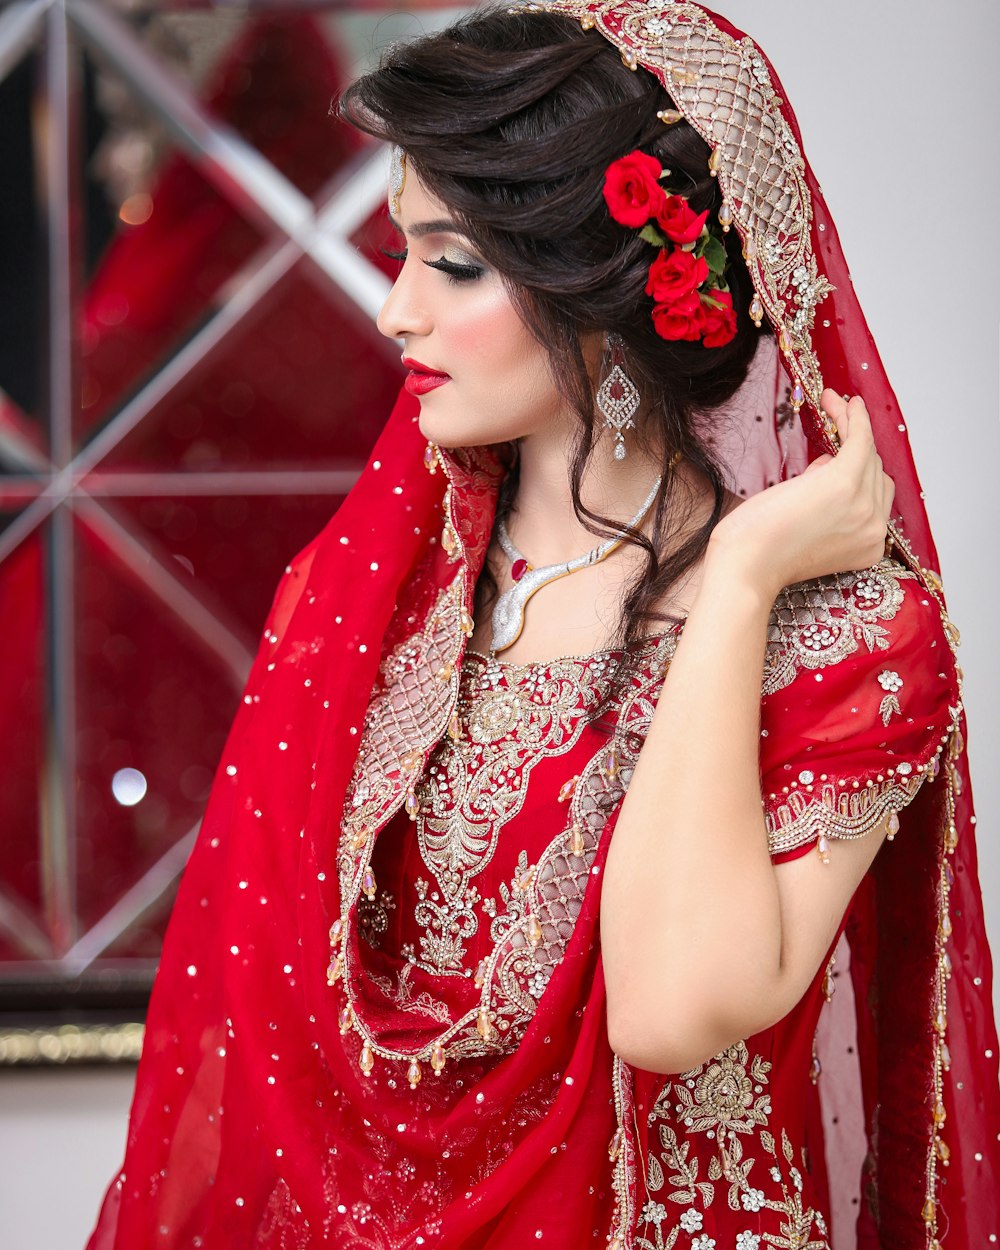 a woman in a red bridal dress with a red rose in her hair